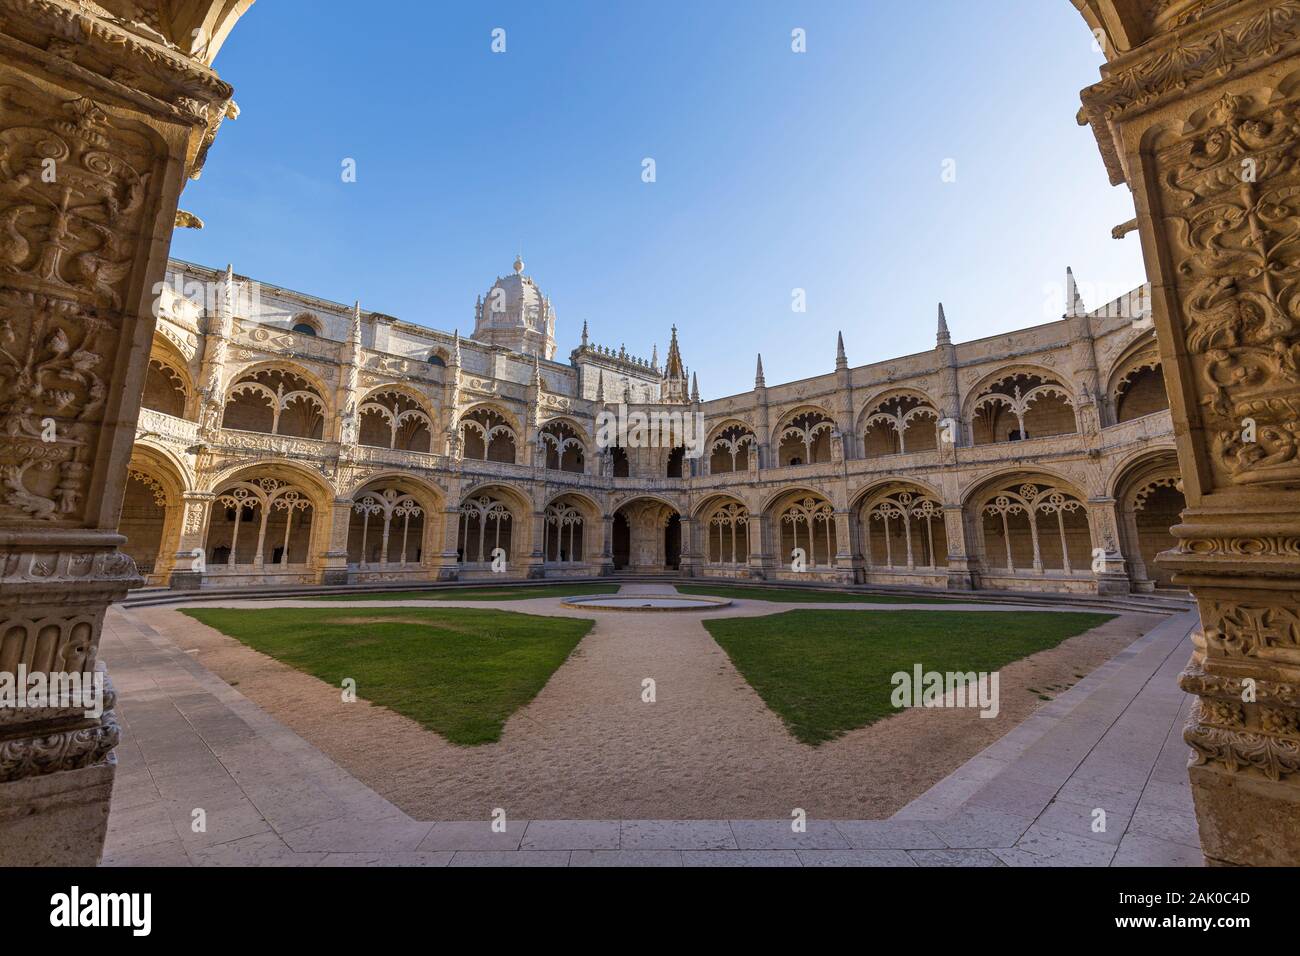 Empty inner courtyard between the ornamental cloisters at the historic Manueline style Mosteiro dos Jeronimos (Jeronimos Monastery) in Belem, Lisbon. Stock Photo